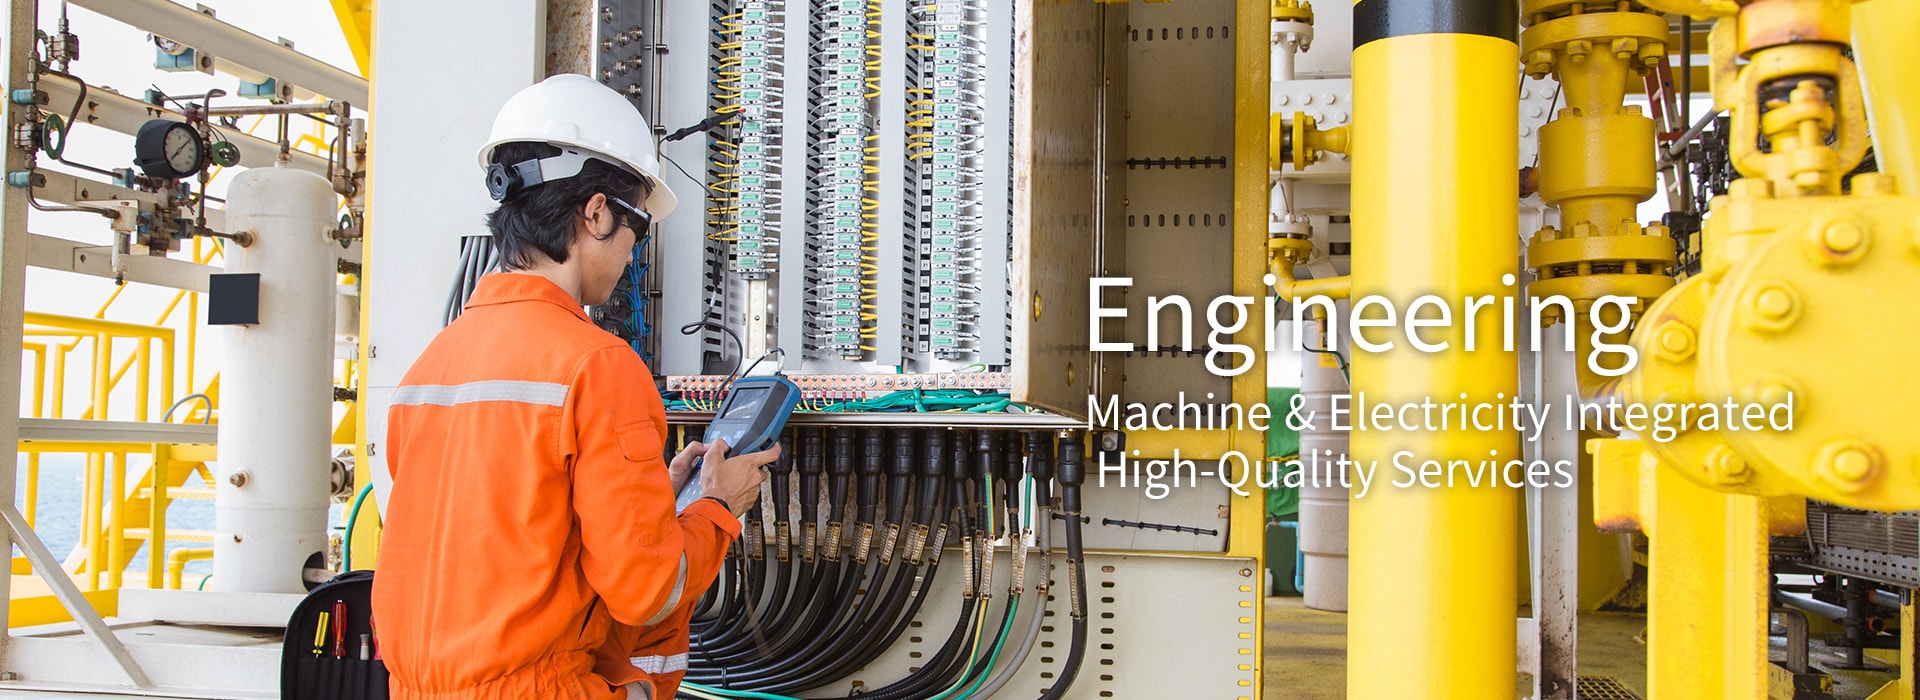 Machine & Electricity Integrated High-Quality Services